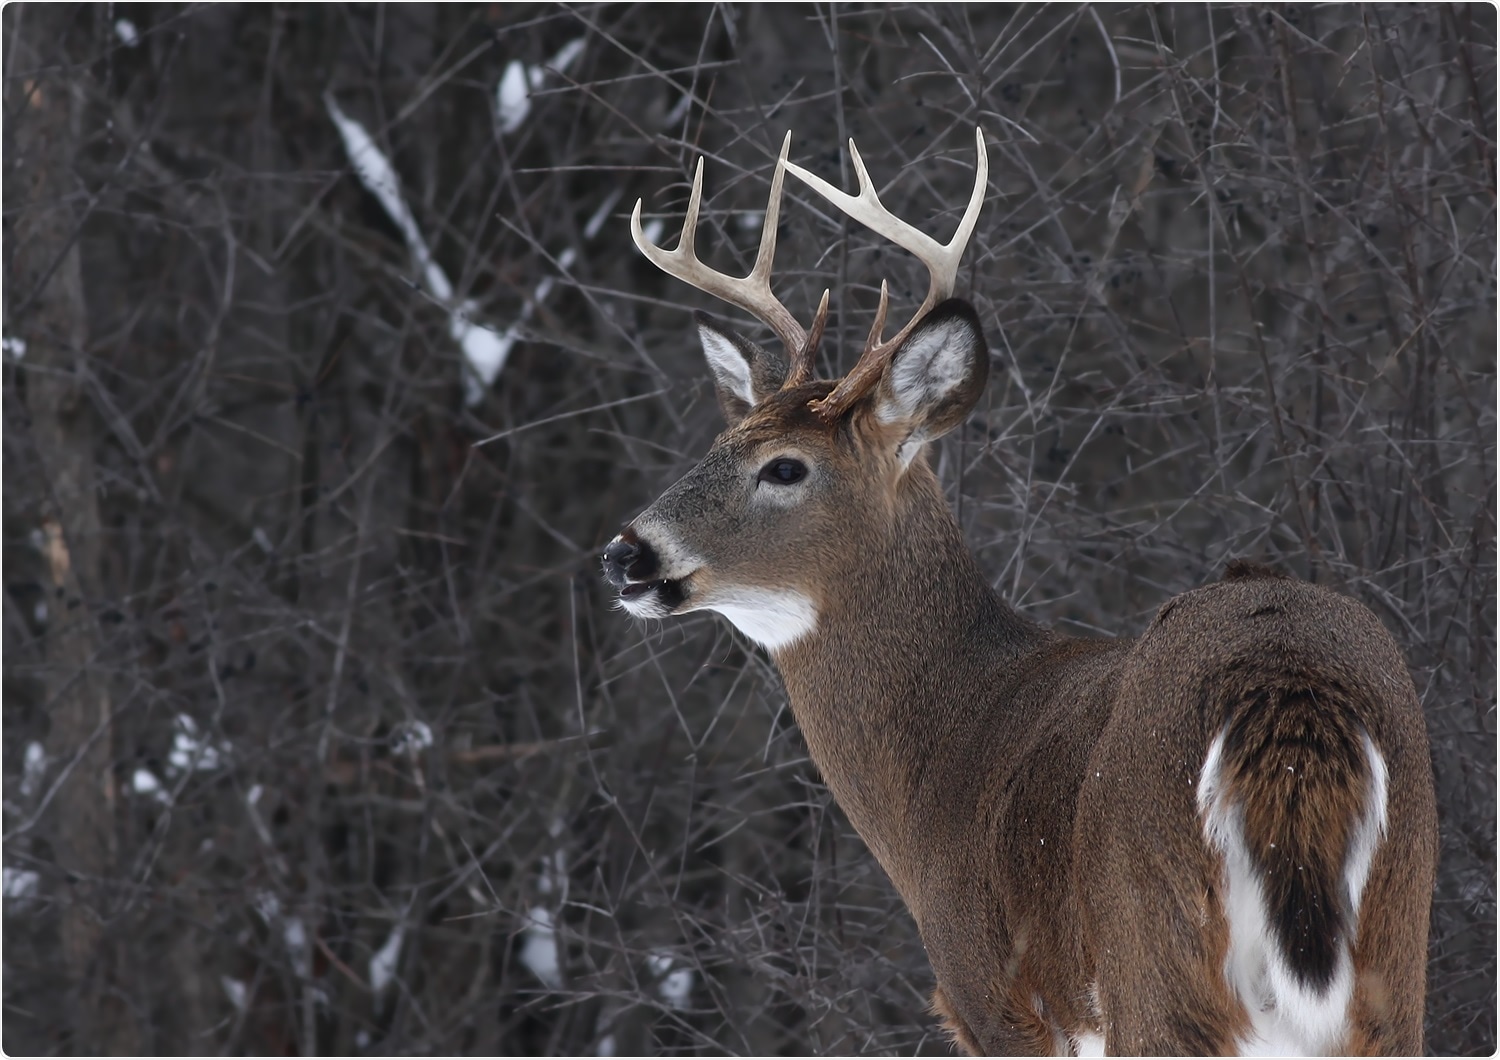 Study: Infection and transmission of SARS-CoV-2 and its alpha variant in pregnant white-tailed deer. Image Credit: Jim Cumming / Shutterstock